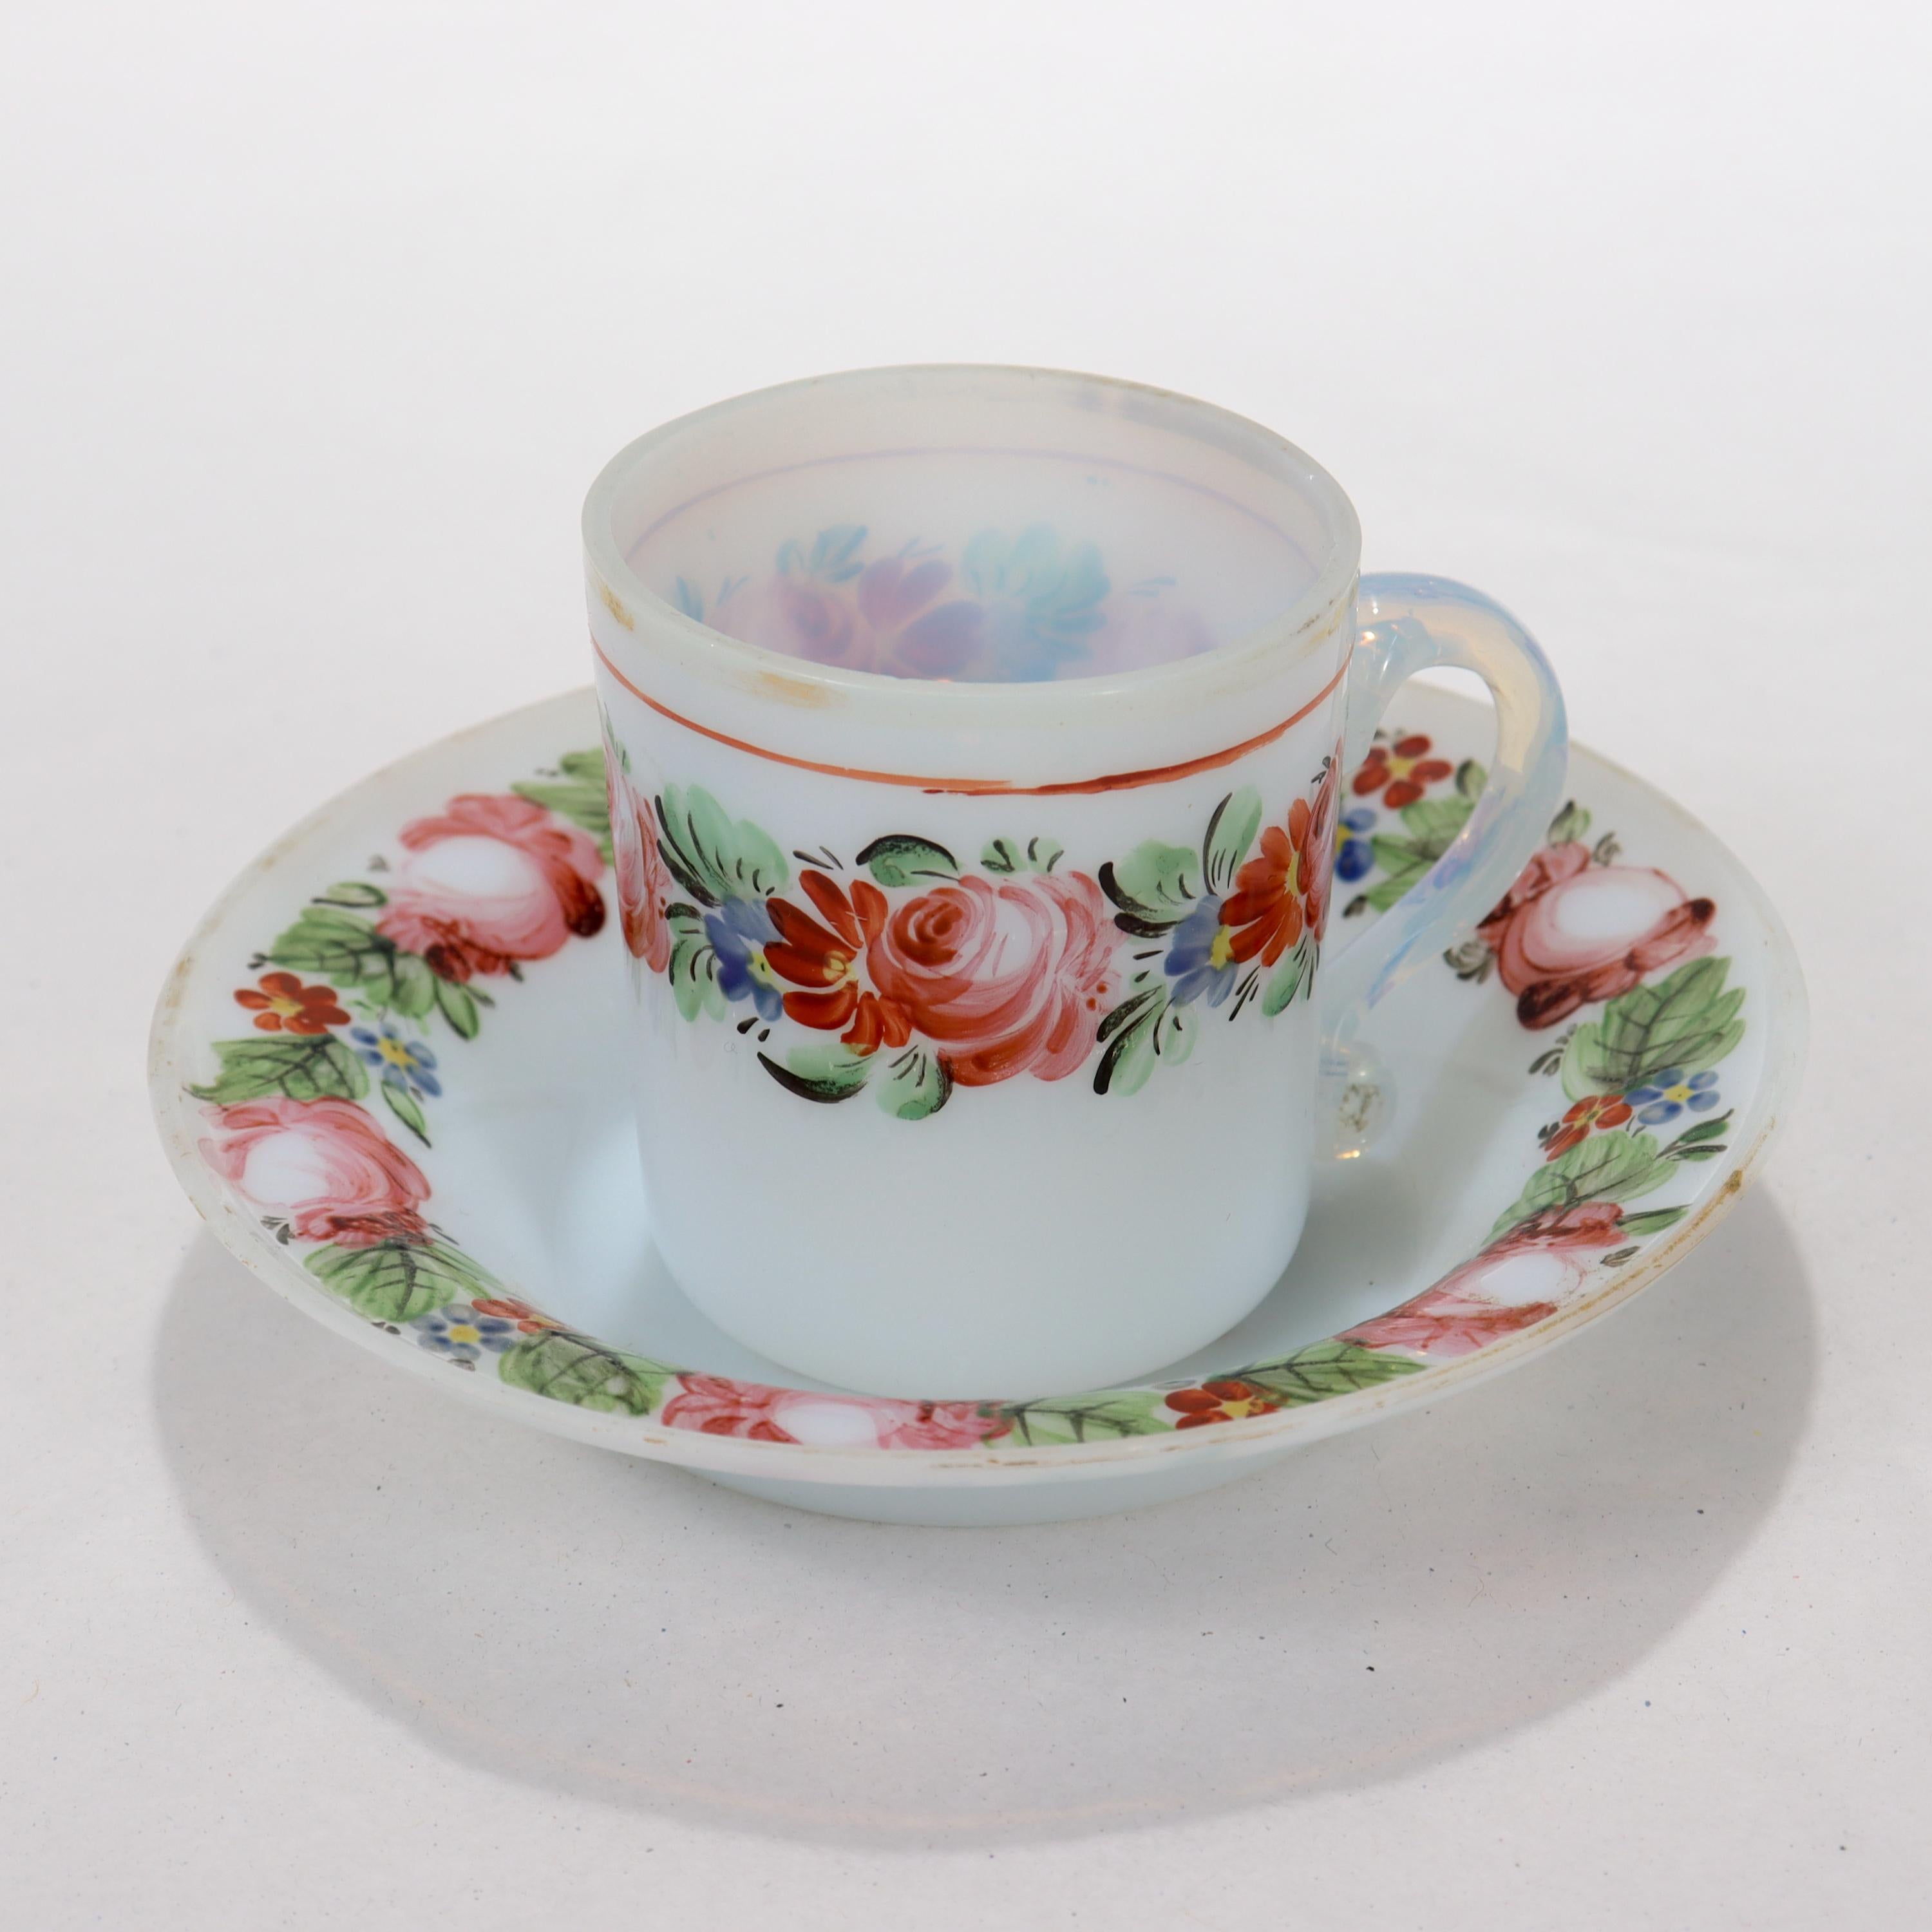 A fine antique white opaline or opalescent glass cup & saucer.

With handpainted flower garlands to the body of the cup & the rim of the saucer & traces of original gilding.

Simply a wonderful early cup & saucer set!

Date:
19th